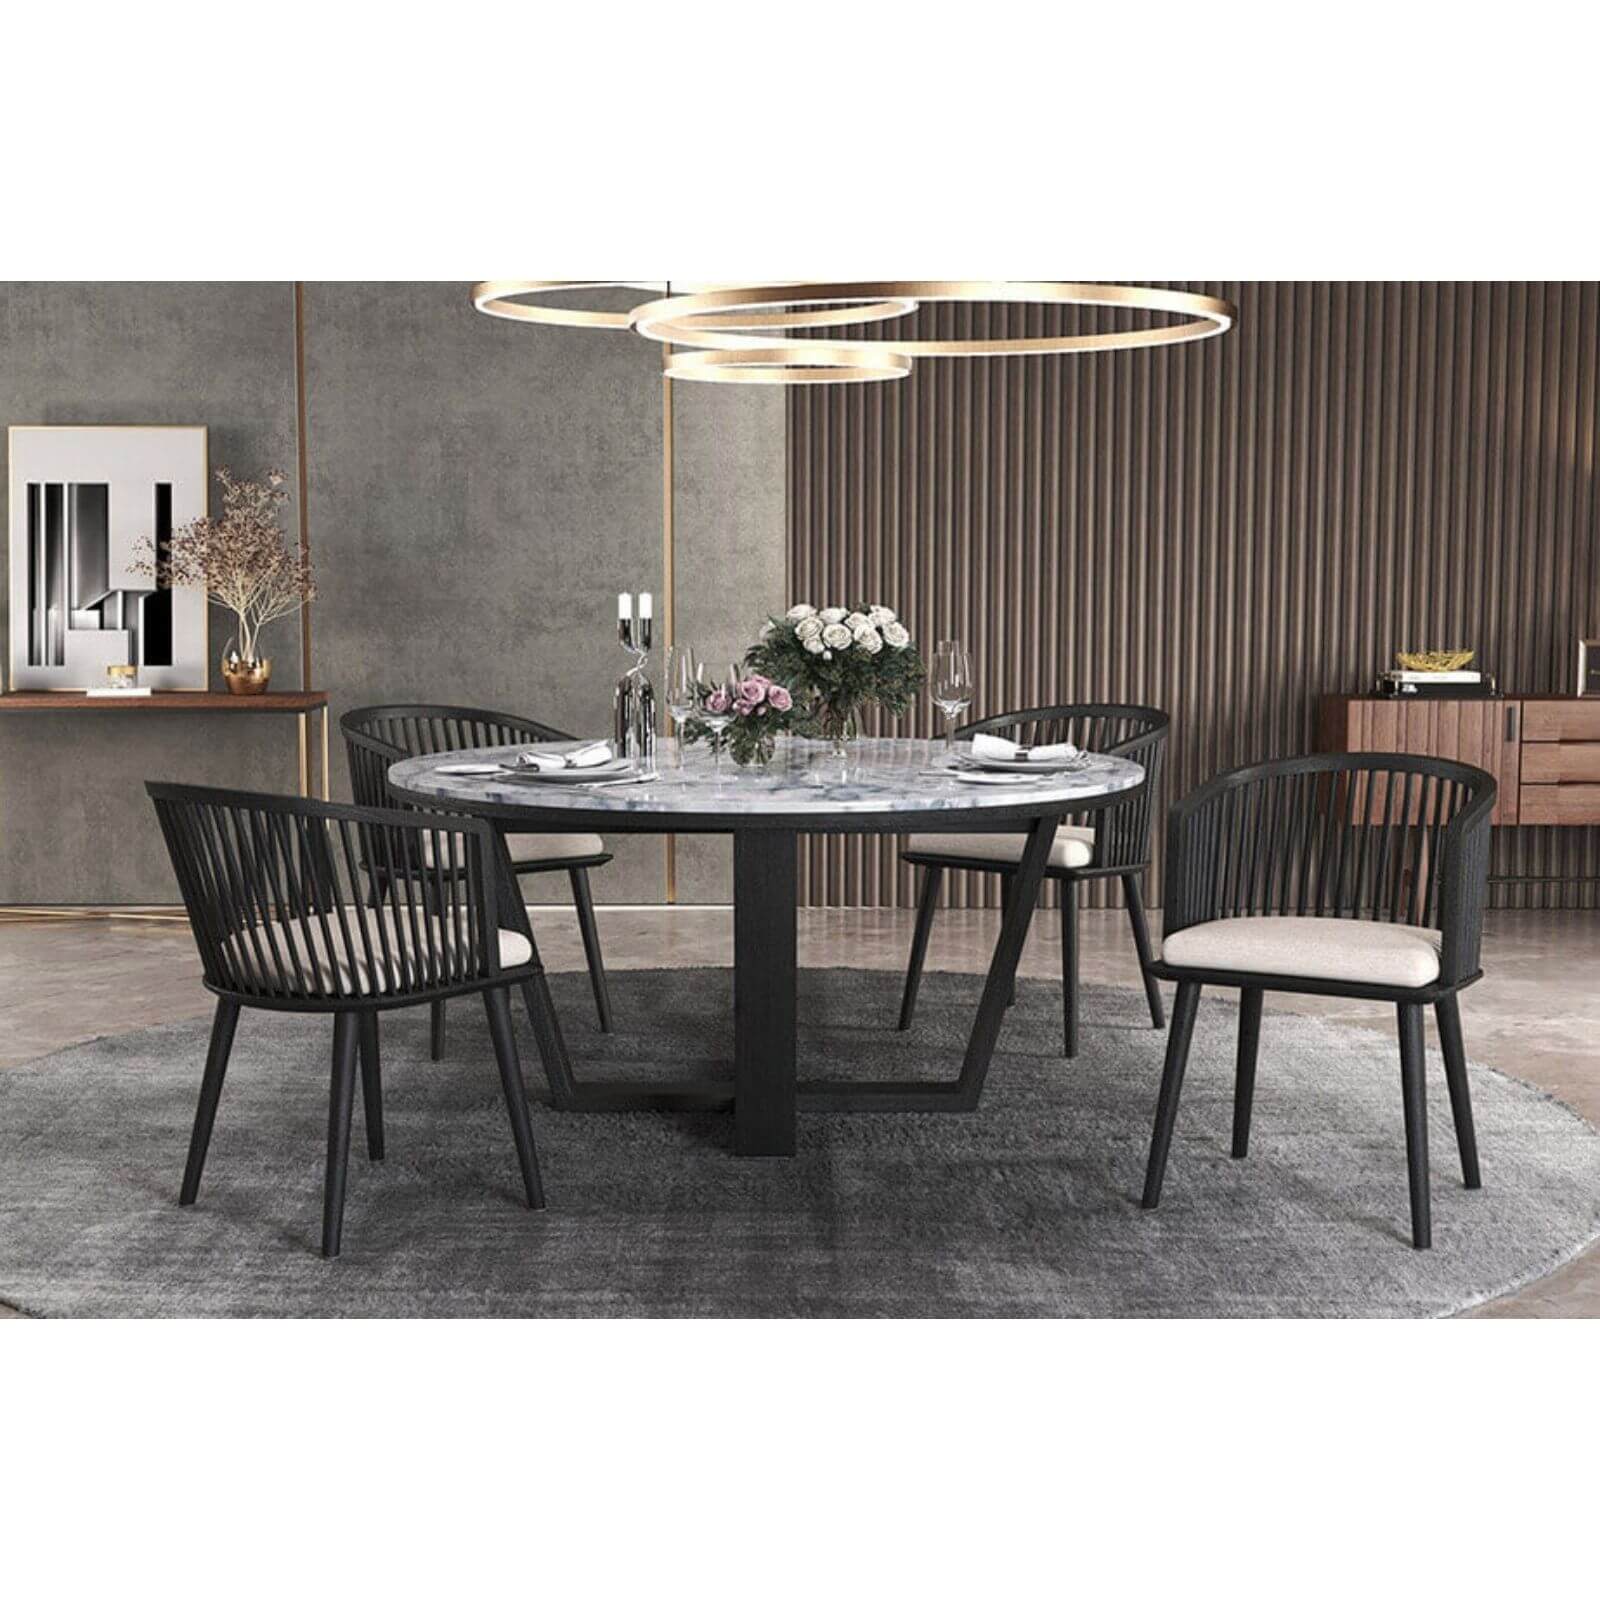 Neo | Modern Black Wooden Coastal Dining Chair With Arms